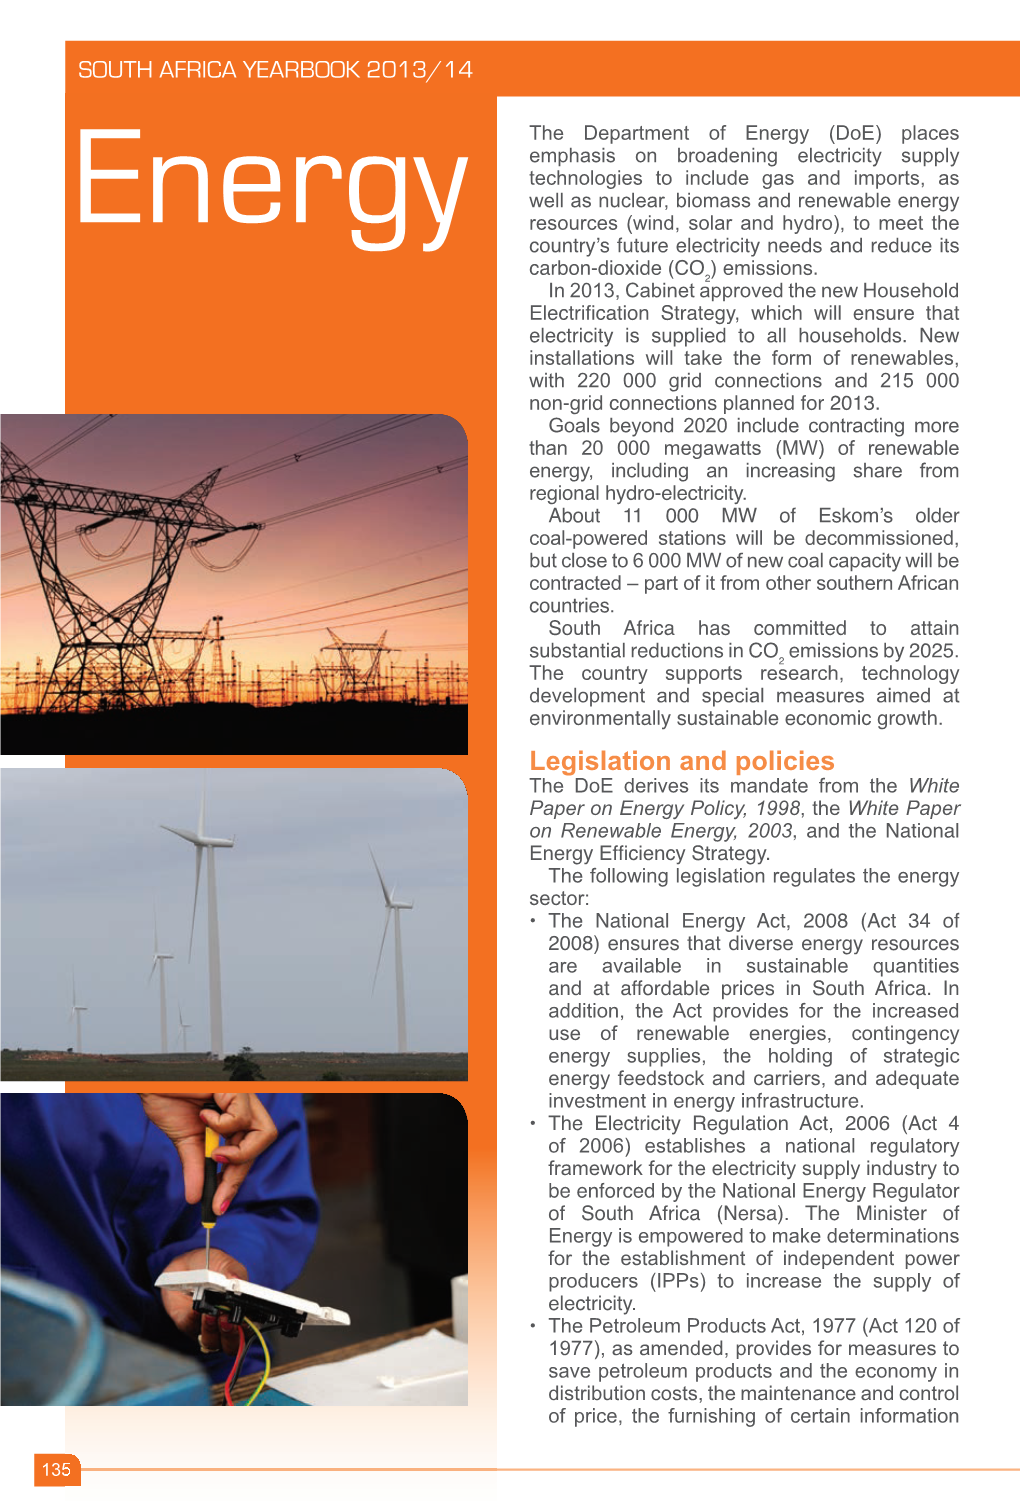 South Africa Yearbook 2013/2014 Energy